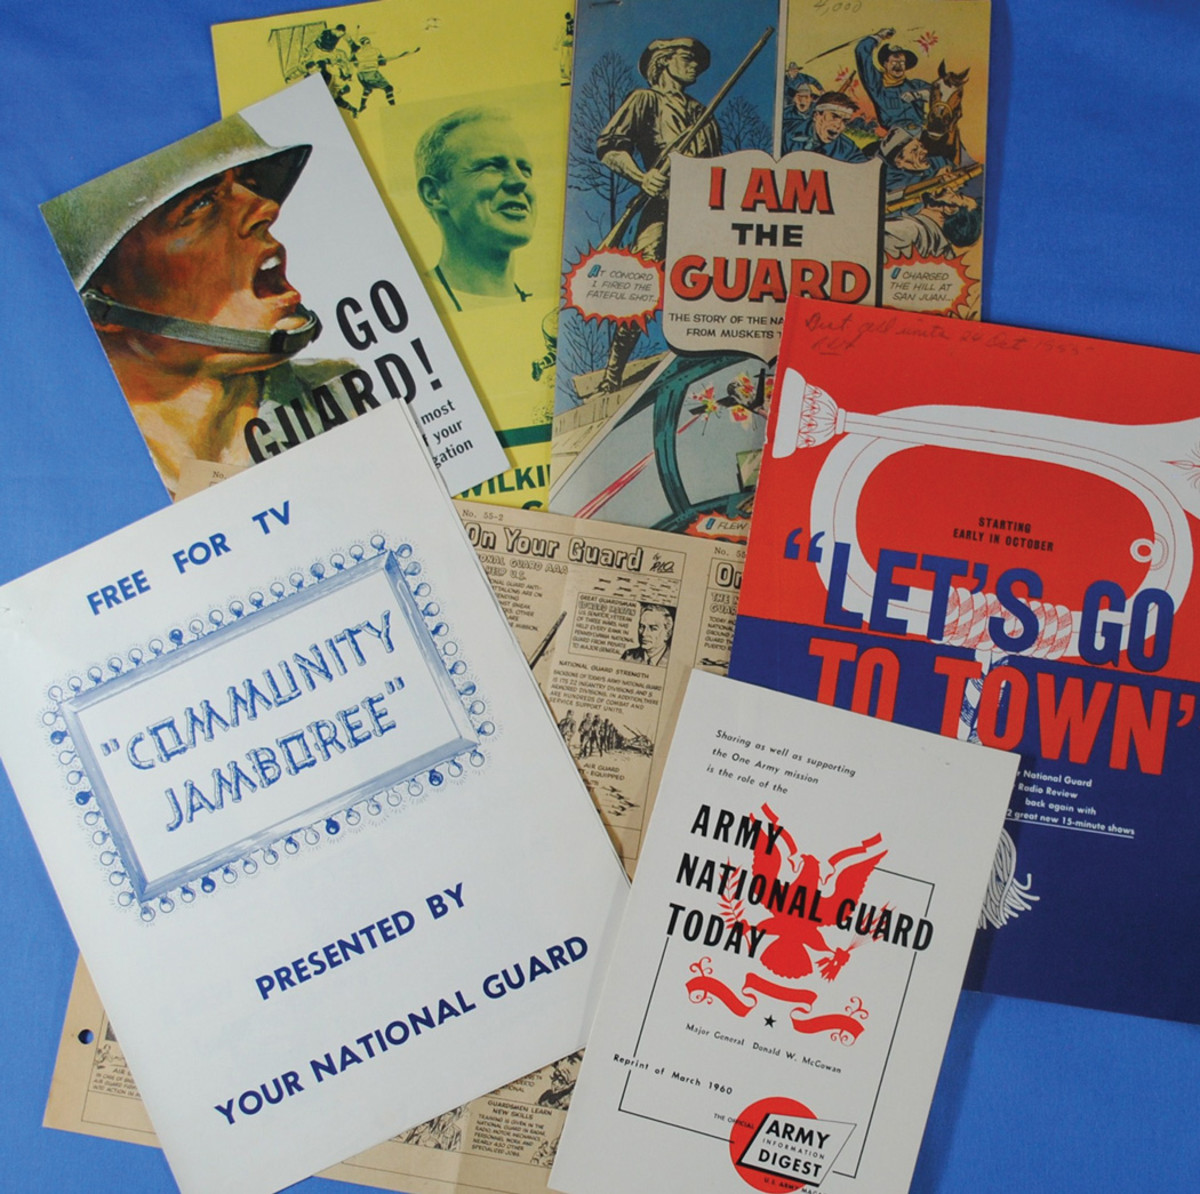 A small collection of recruiting pamphlets and programs from the Virginia National Guard archives from the 1950s and early 1960s.